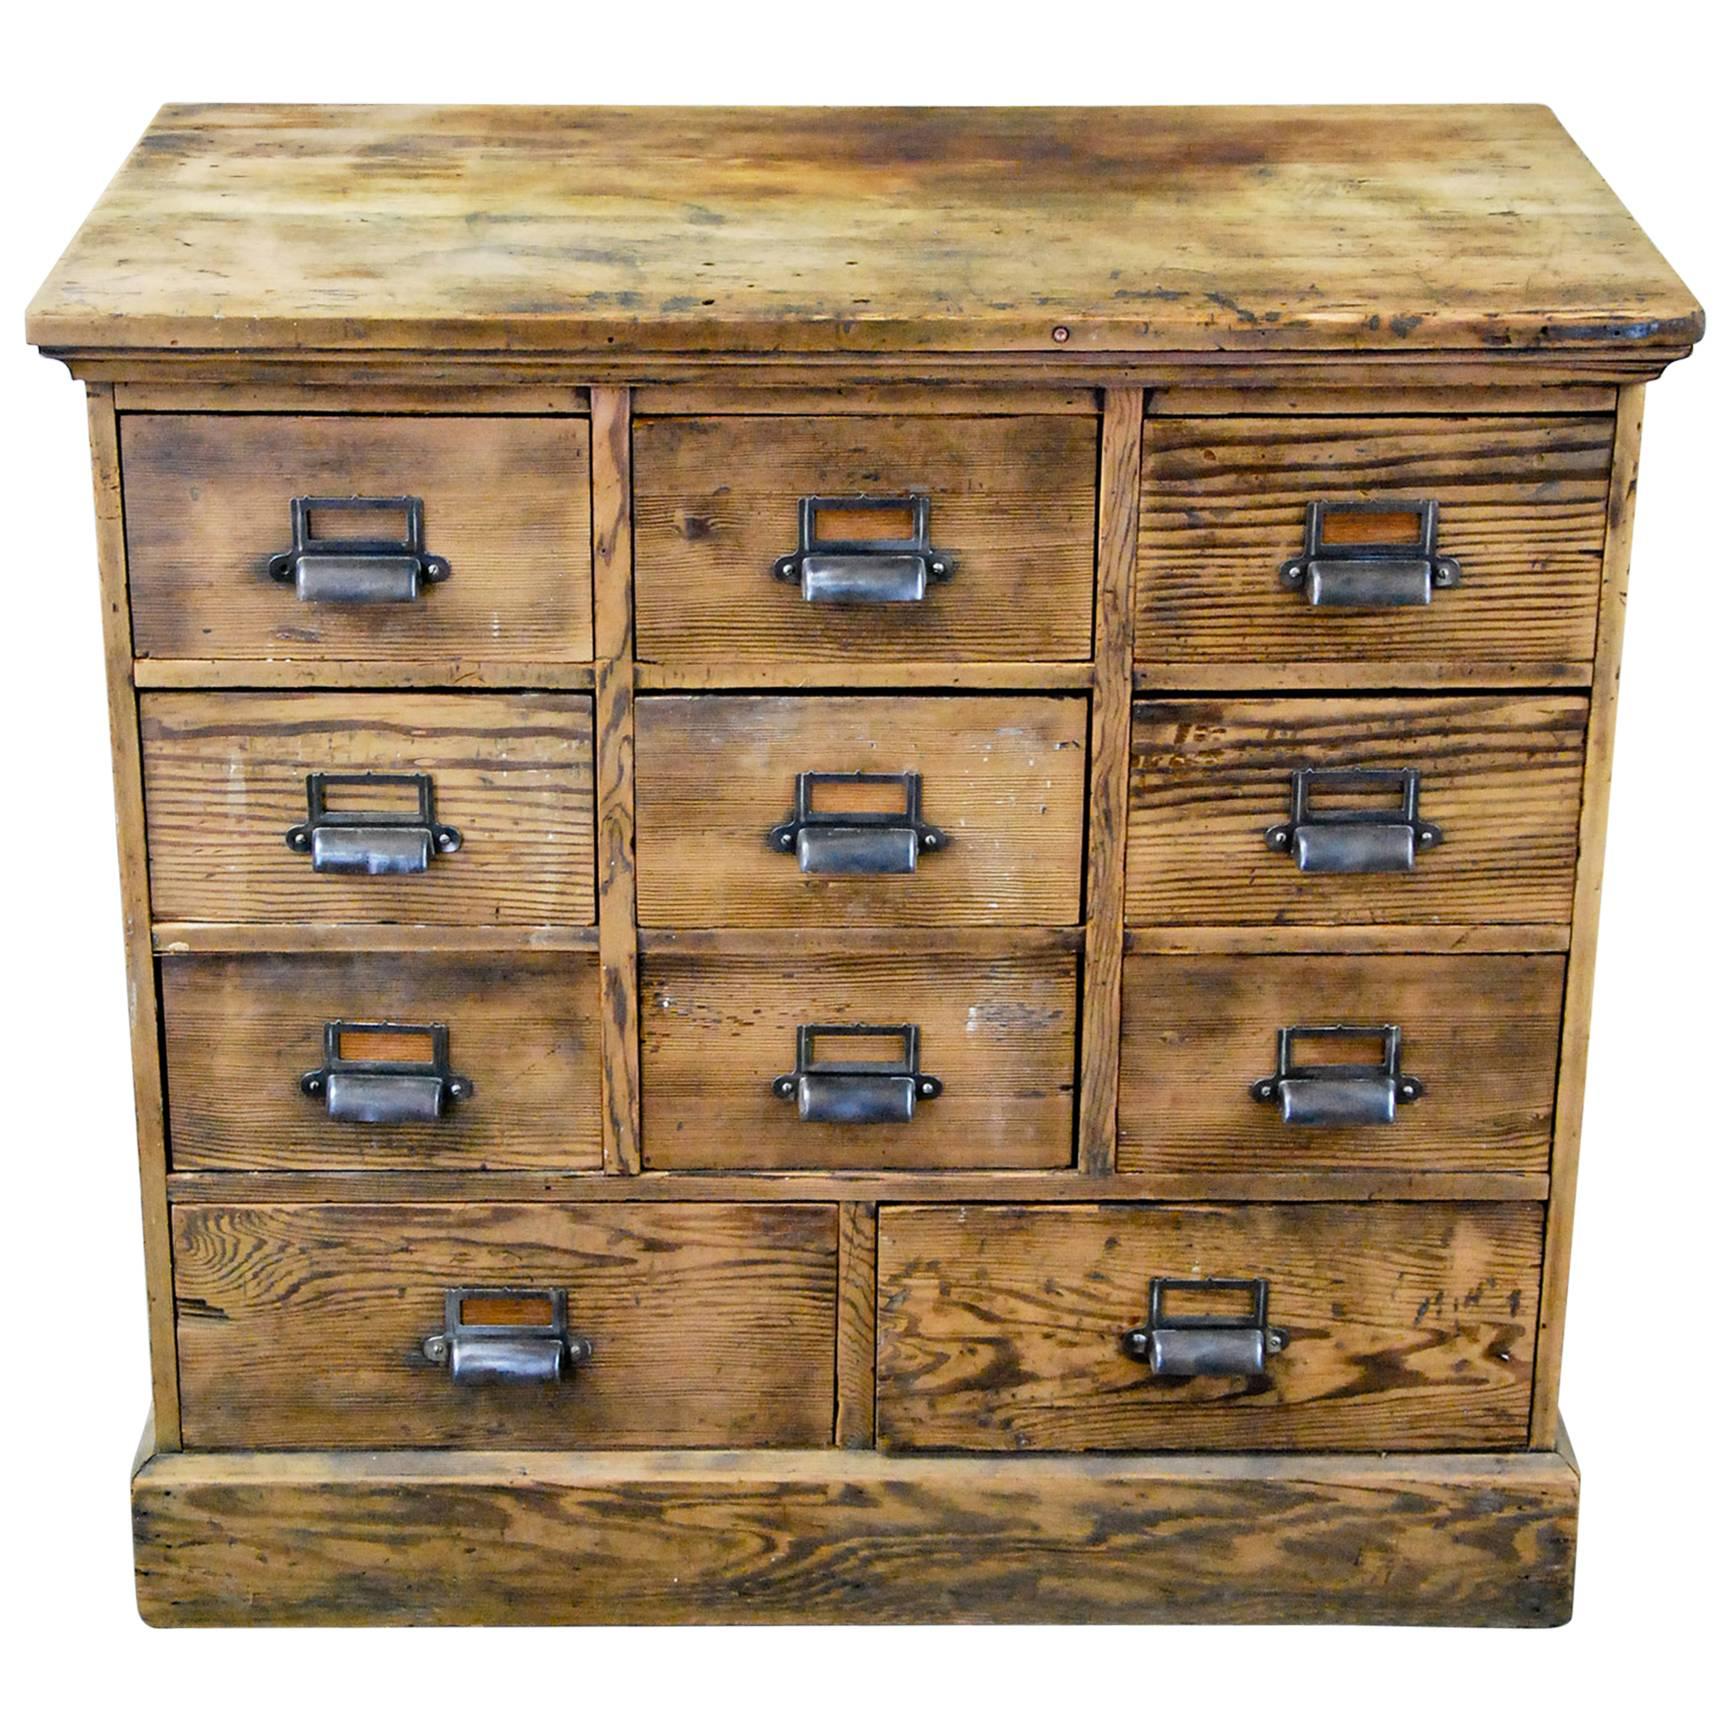 1910 Wooden Multi Drawer Apothecary Cabinet